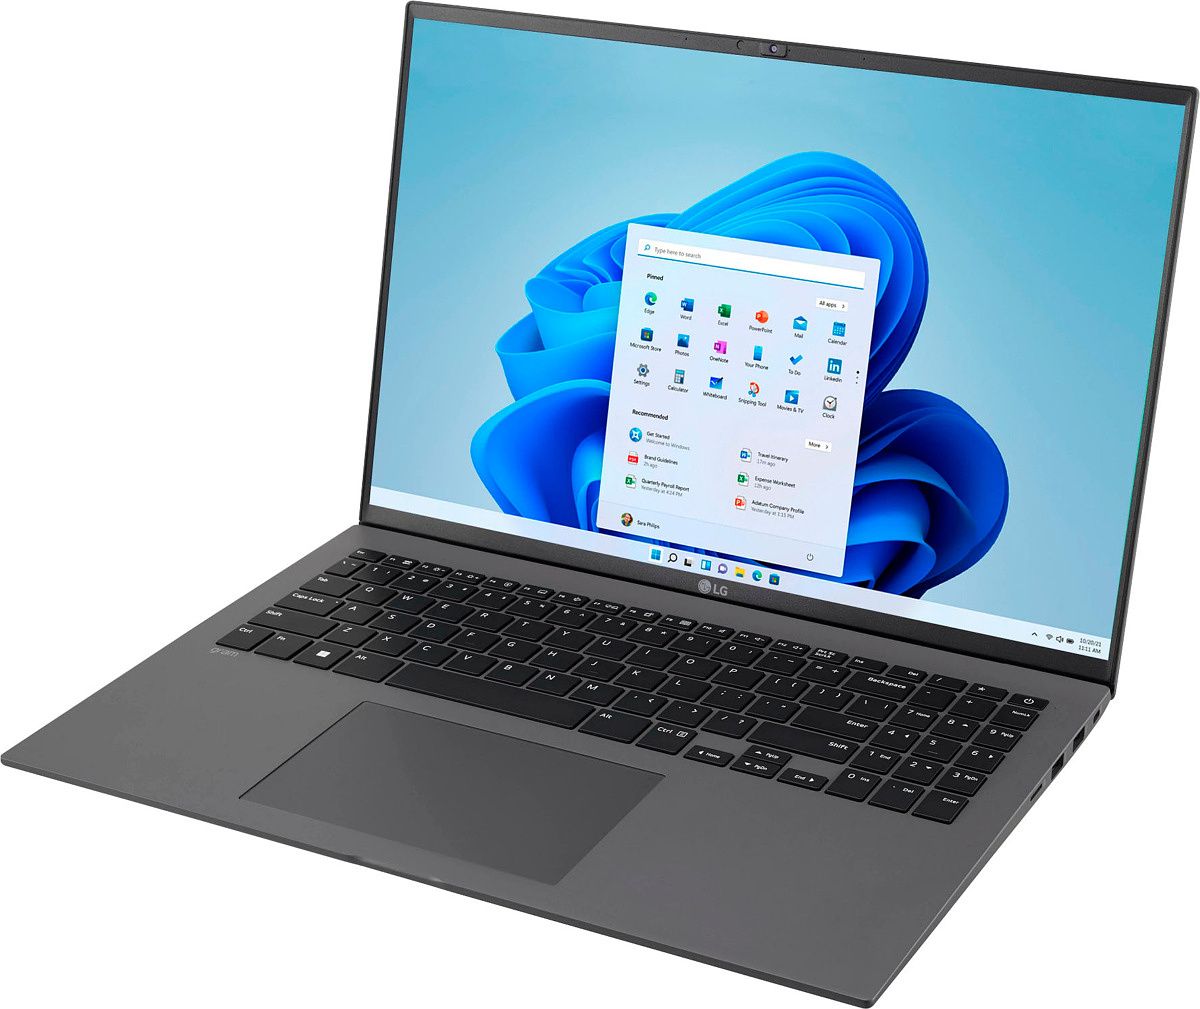 The LG gram 16 is a very lightweight, yet still powerful laptop with a large 16-inch display and a 16:10 aspect ratio.